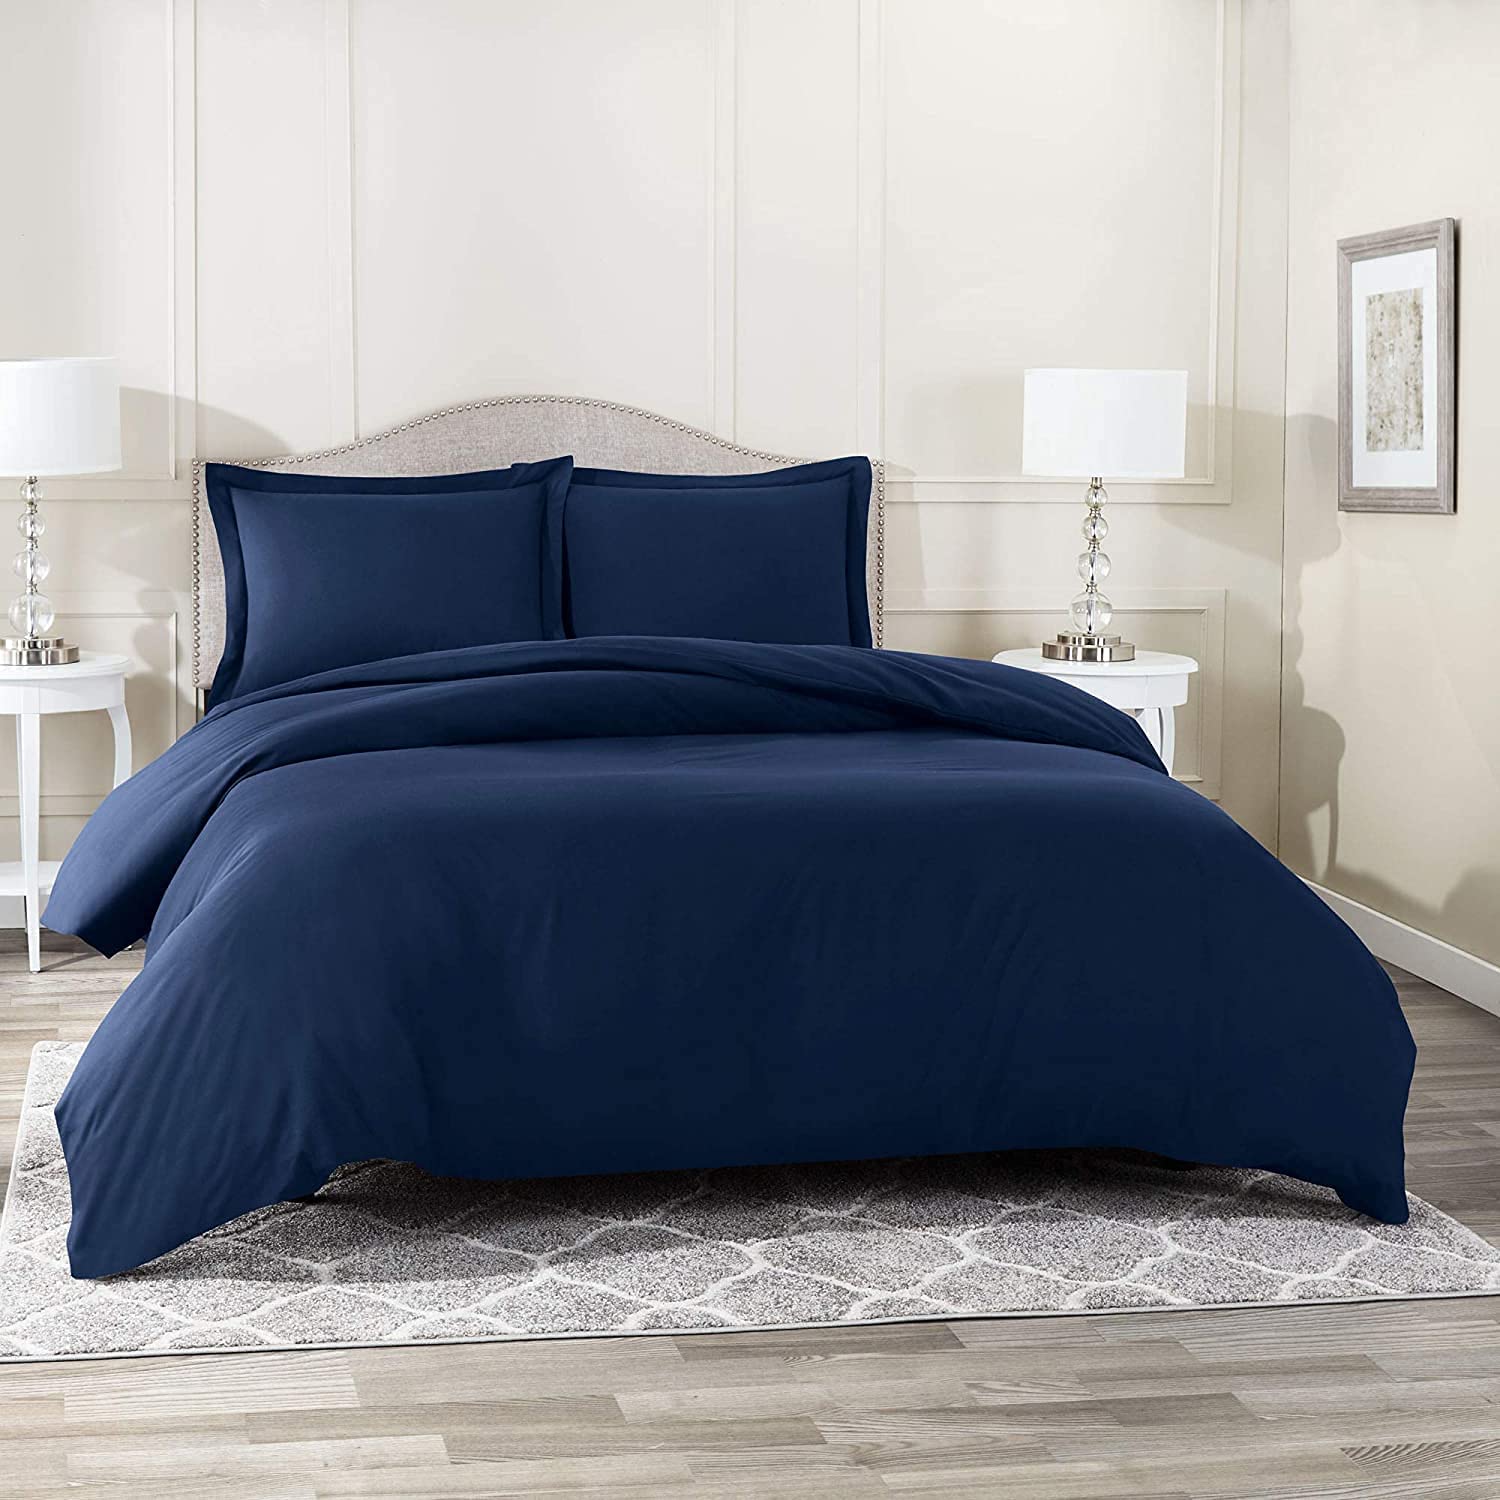 100% Pure Egyptian Cotton King Navy Duvet Cover Set 400 Thread Count- 3 Piece- Sateen Weave- Long Staple Combed Cotton-Extra Soft Smooth Silky- Sateen Weave (King,Navy)